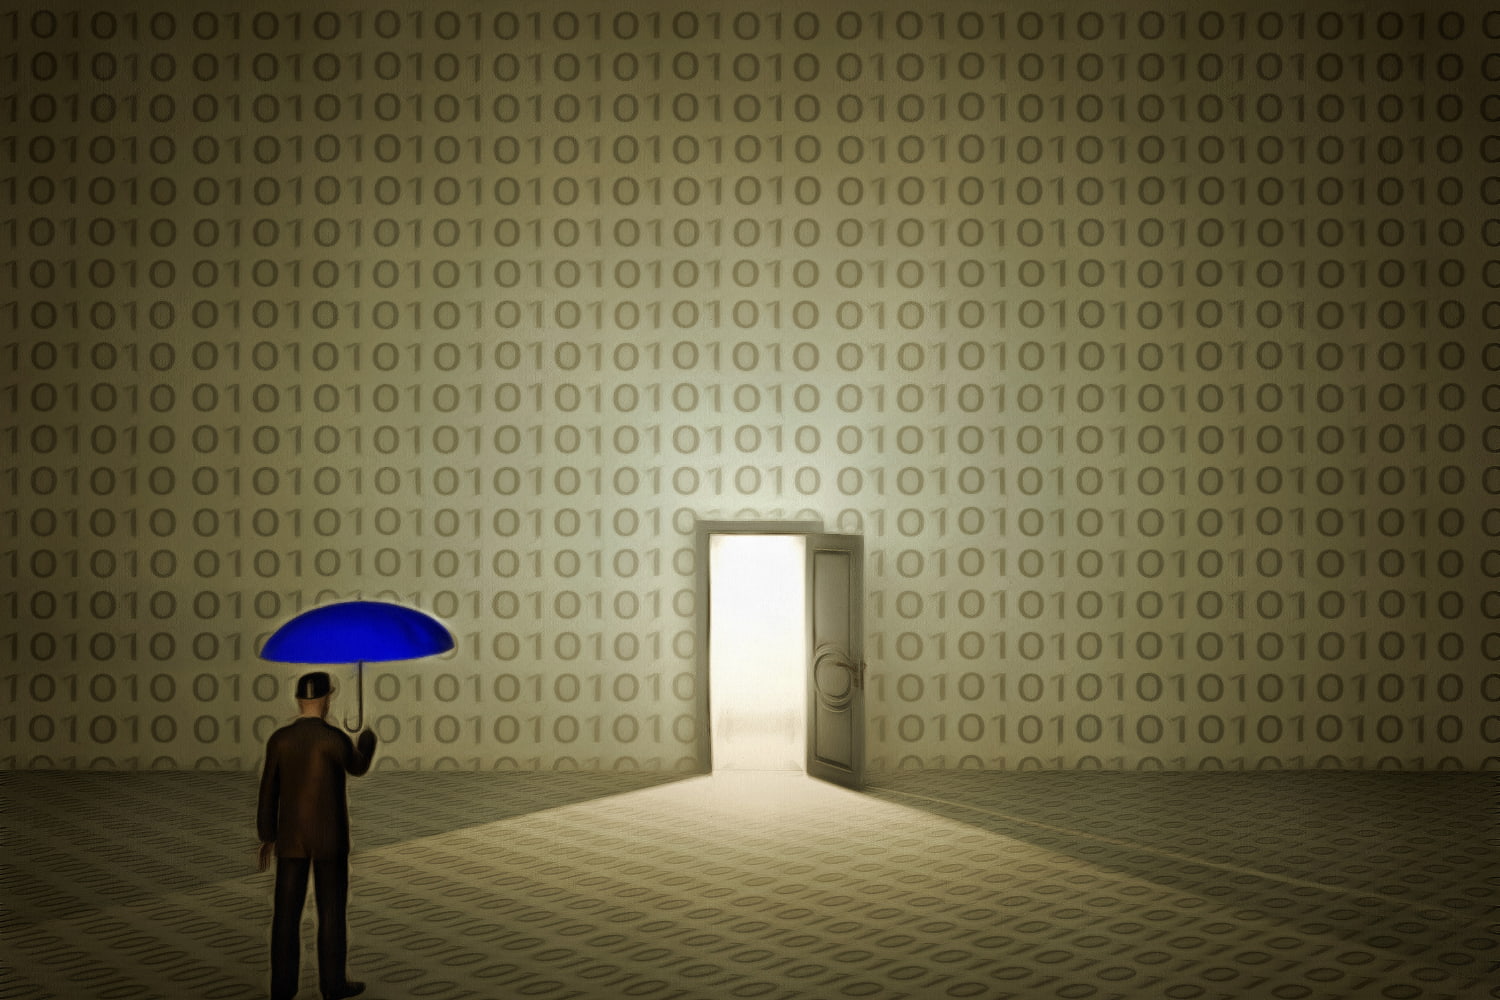 Person with a blue umbrella walks to a backdoor in a wall made of numbers 0 and 1